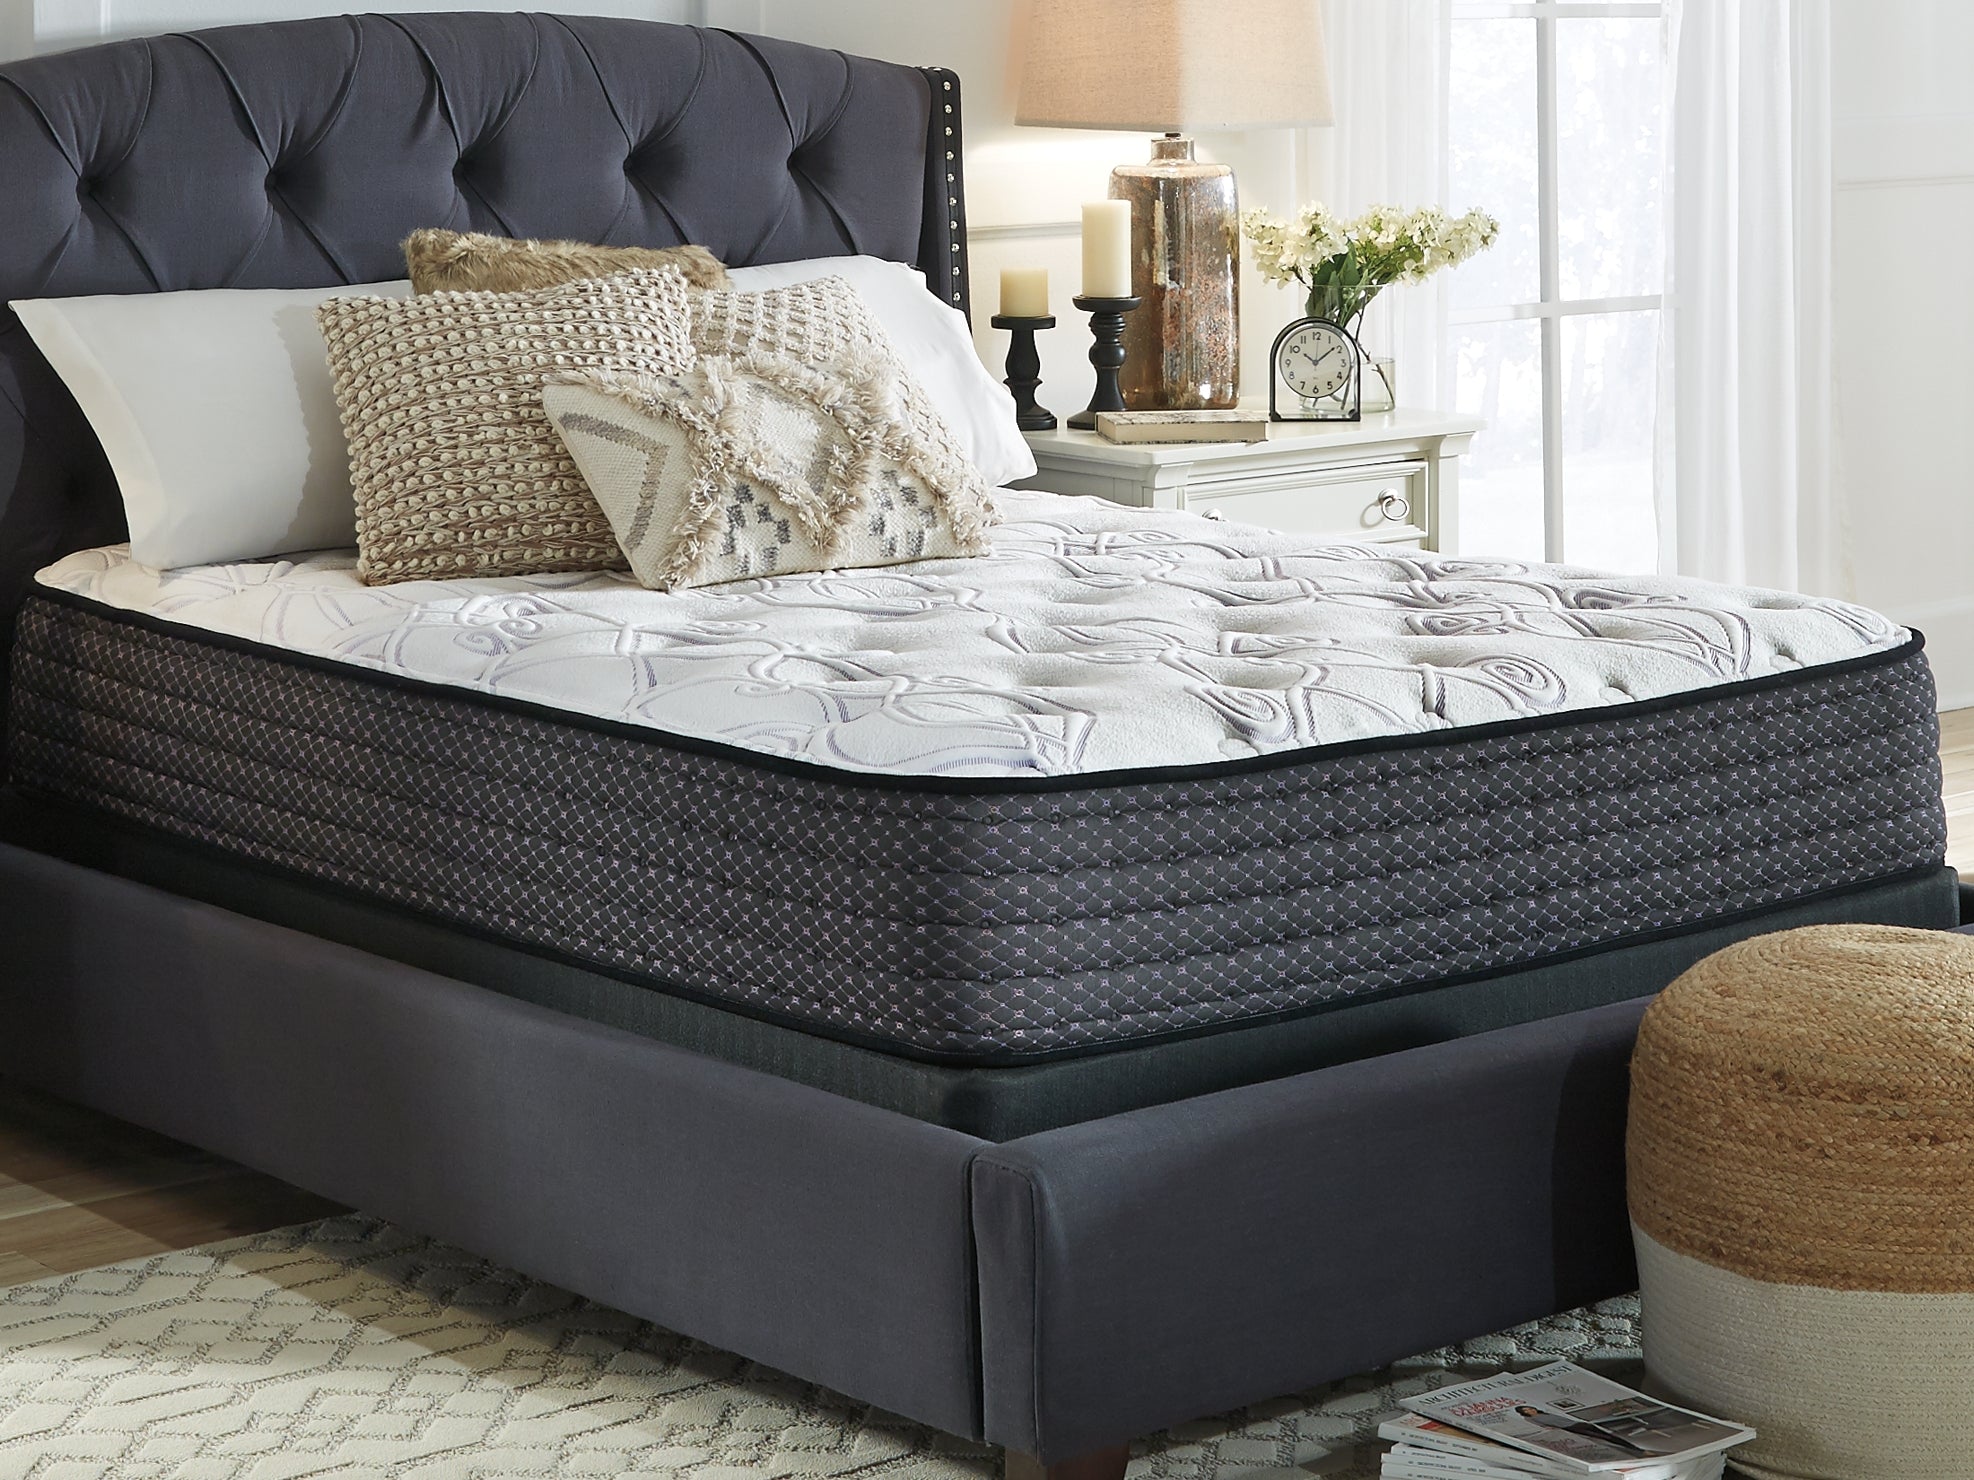 Limited Edition Plush Queen Mattress with Better than a Boxspring Queen Foundation - furniture place usa